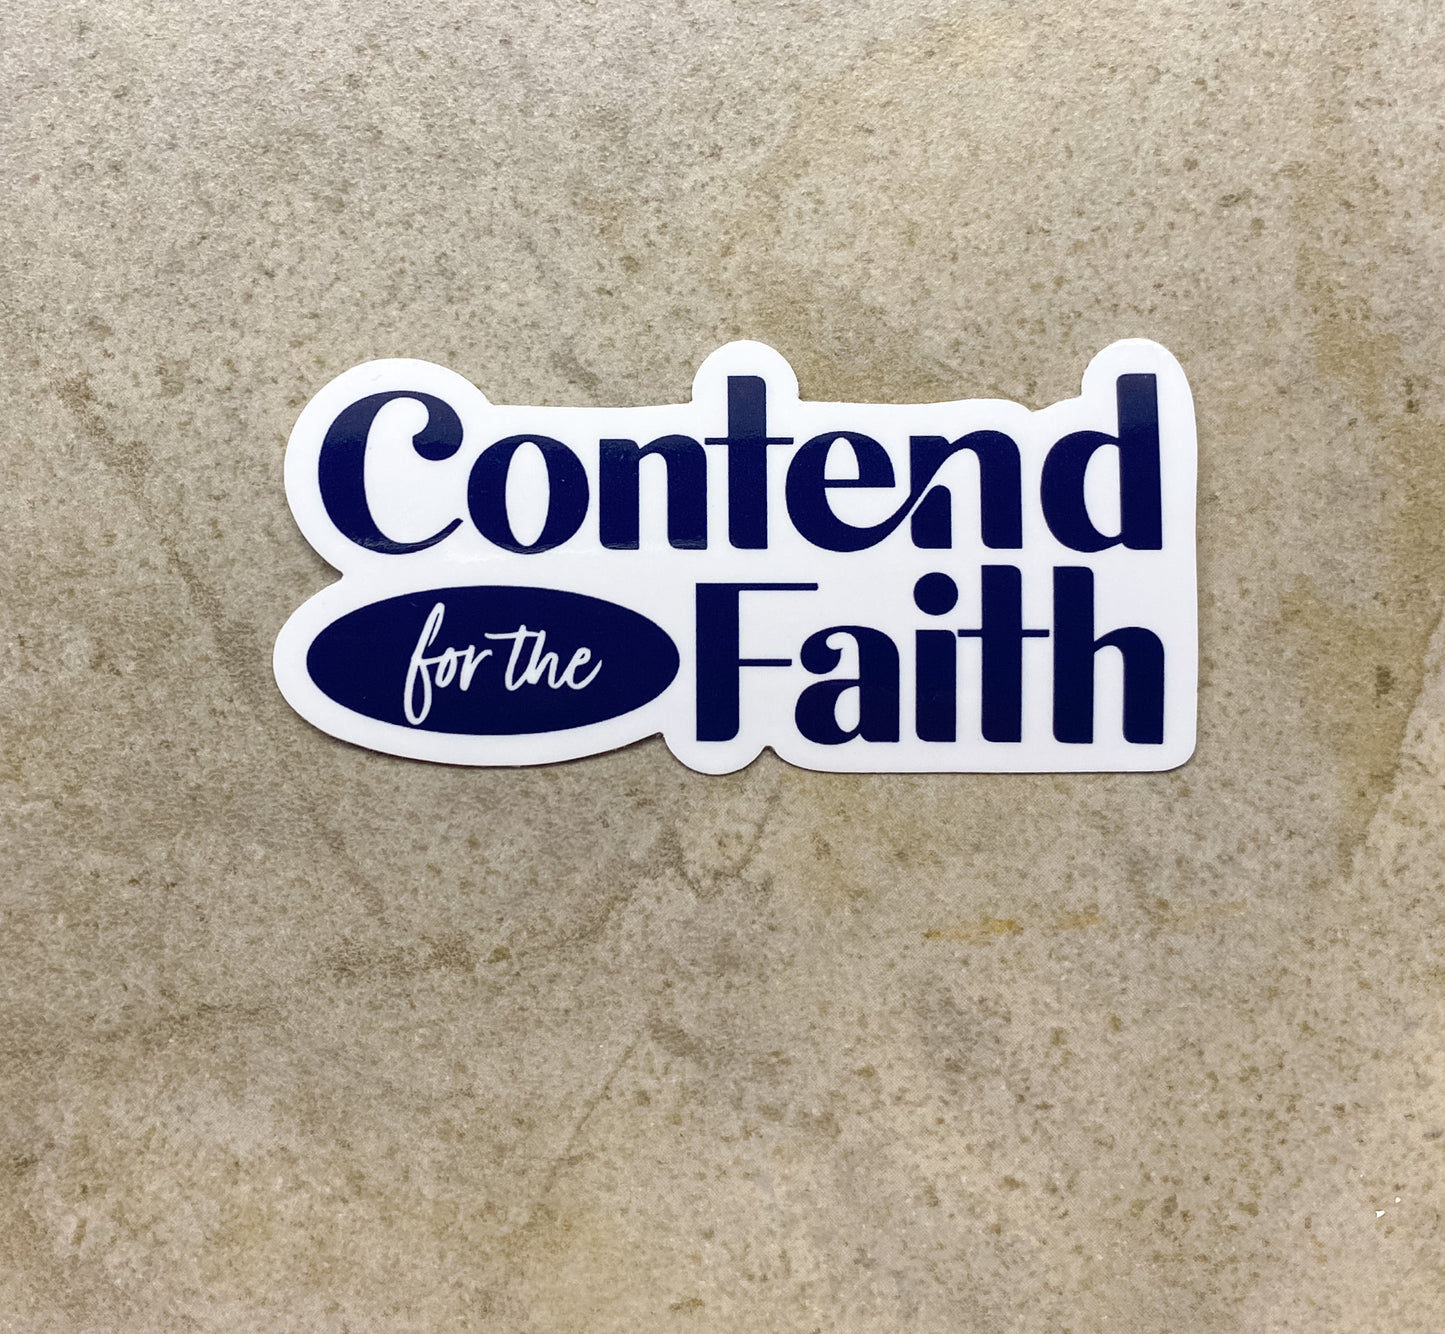 Contend for the Faith Sticker